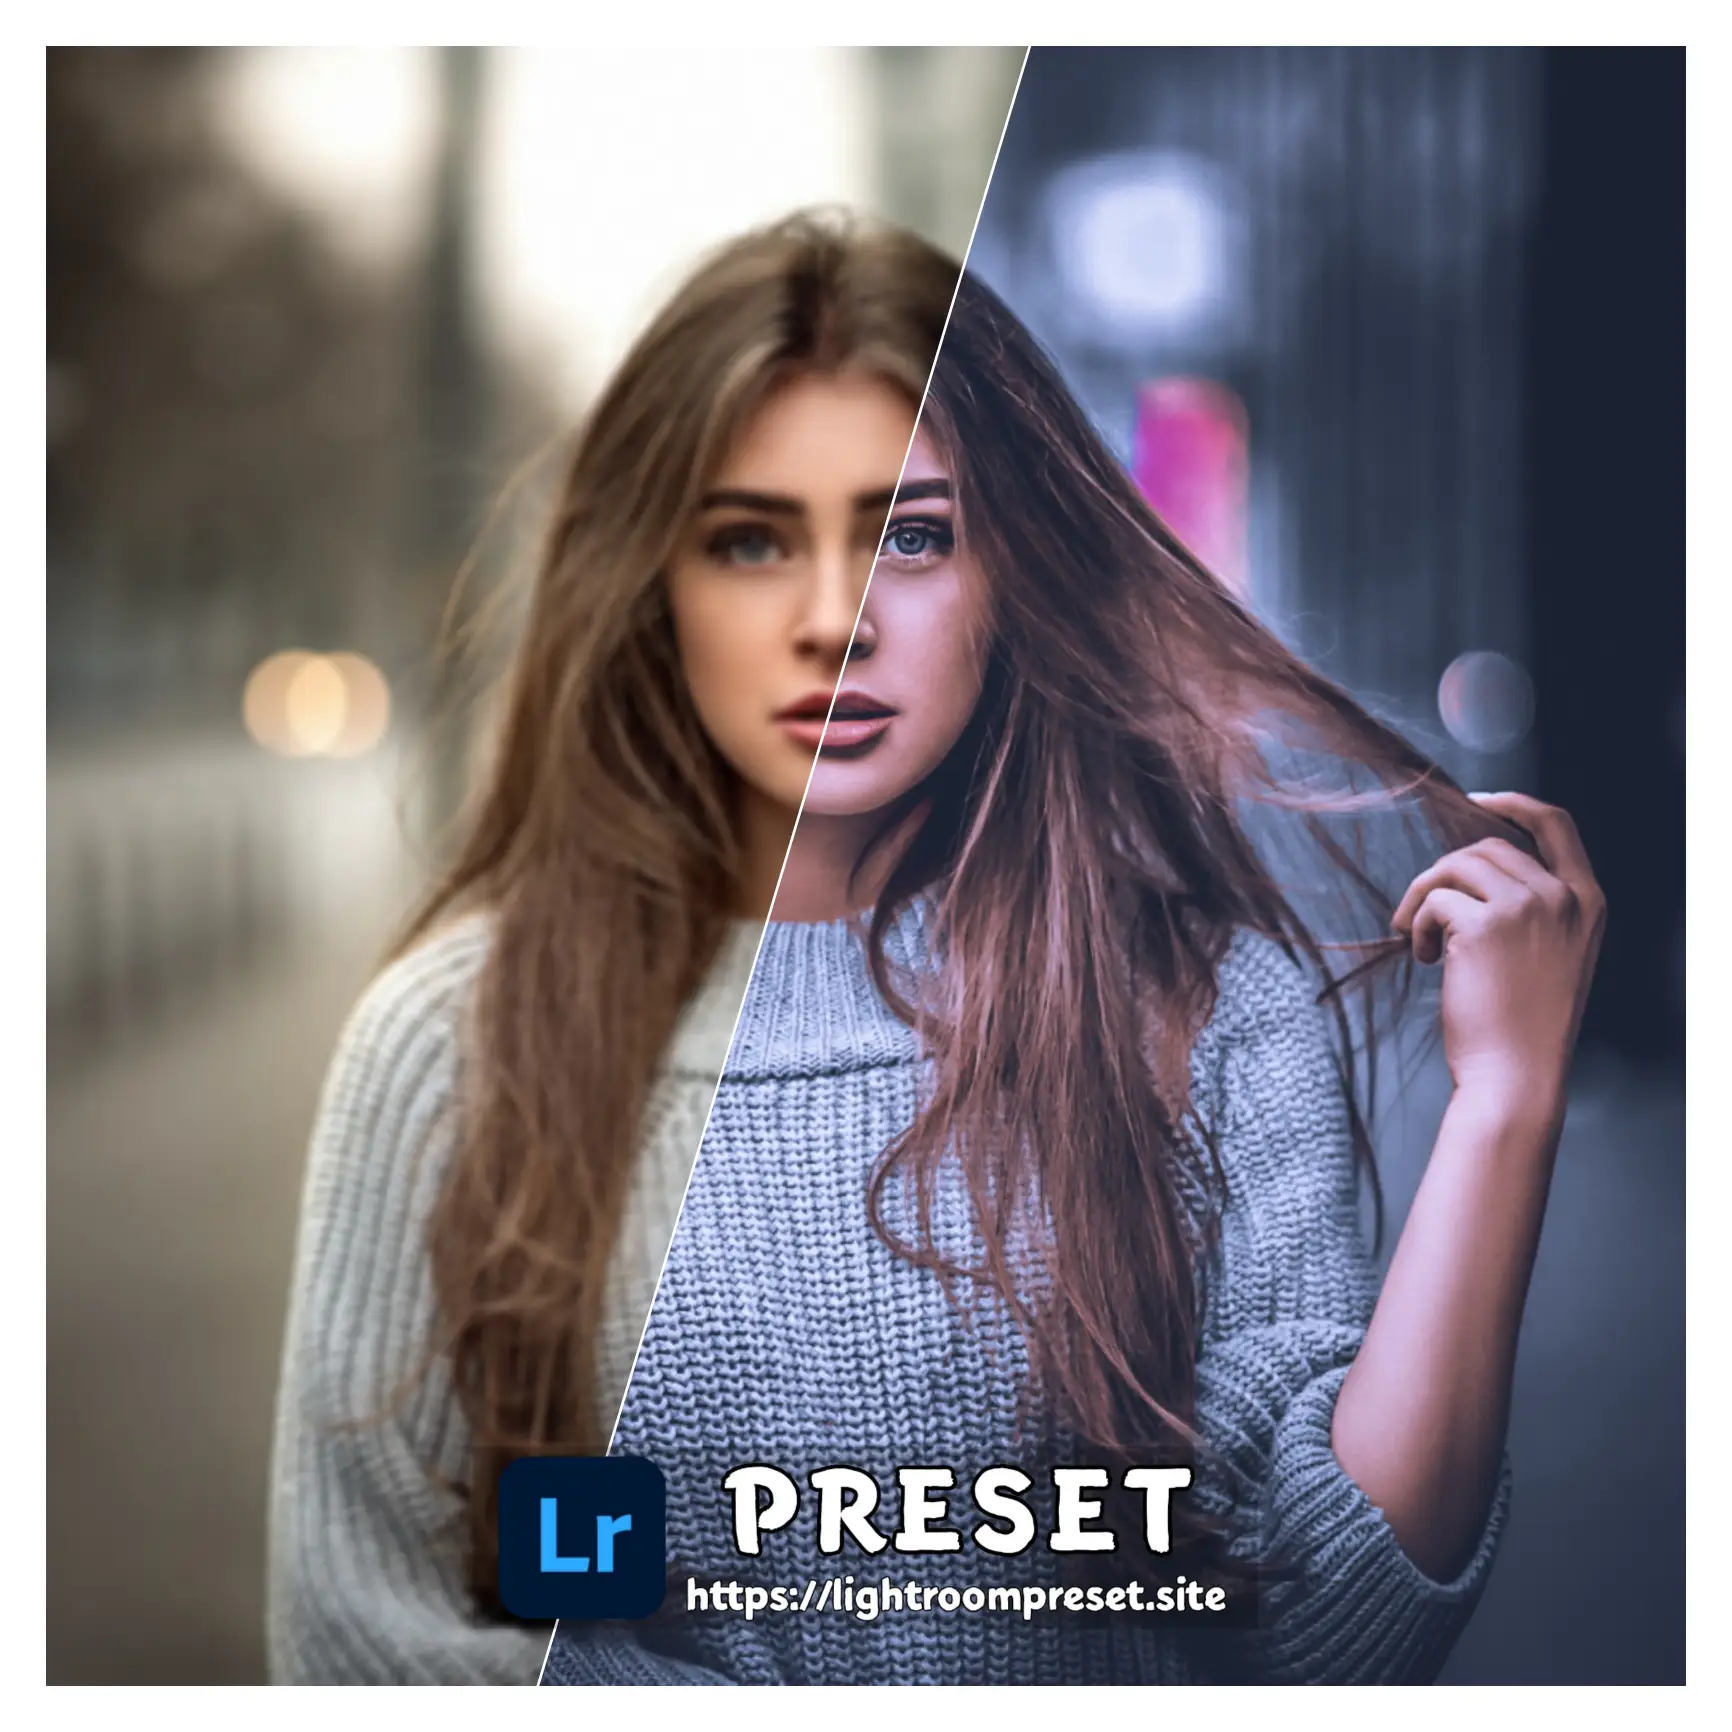 You are currently viewing Lightroom presets mod apk